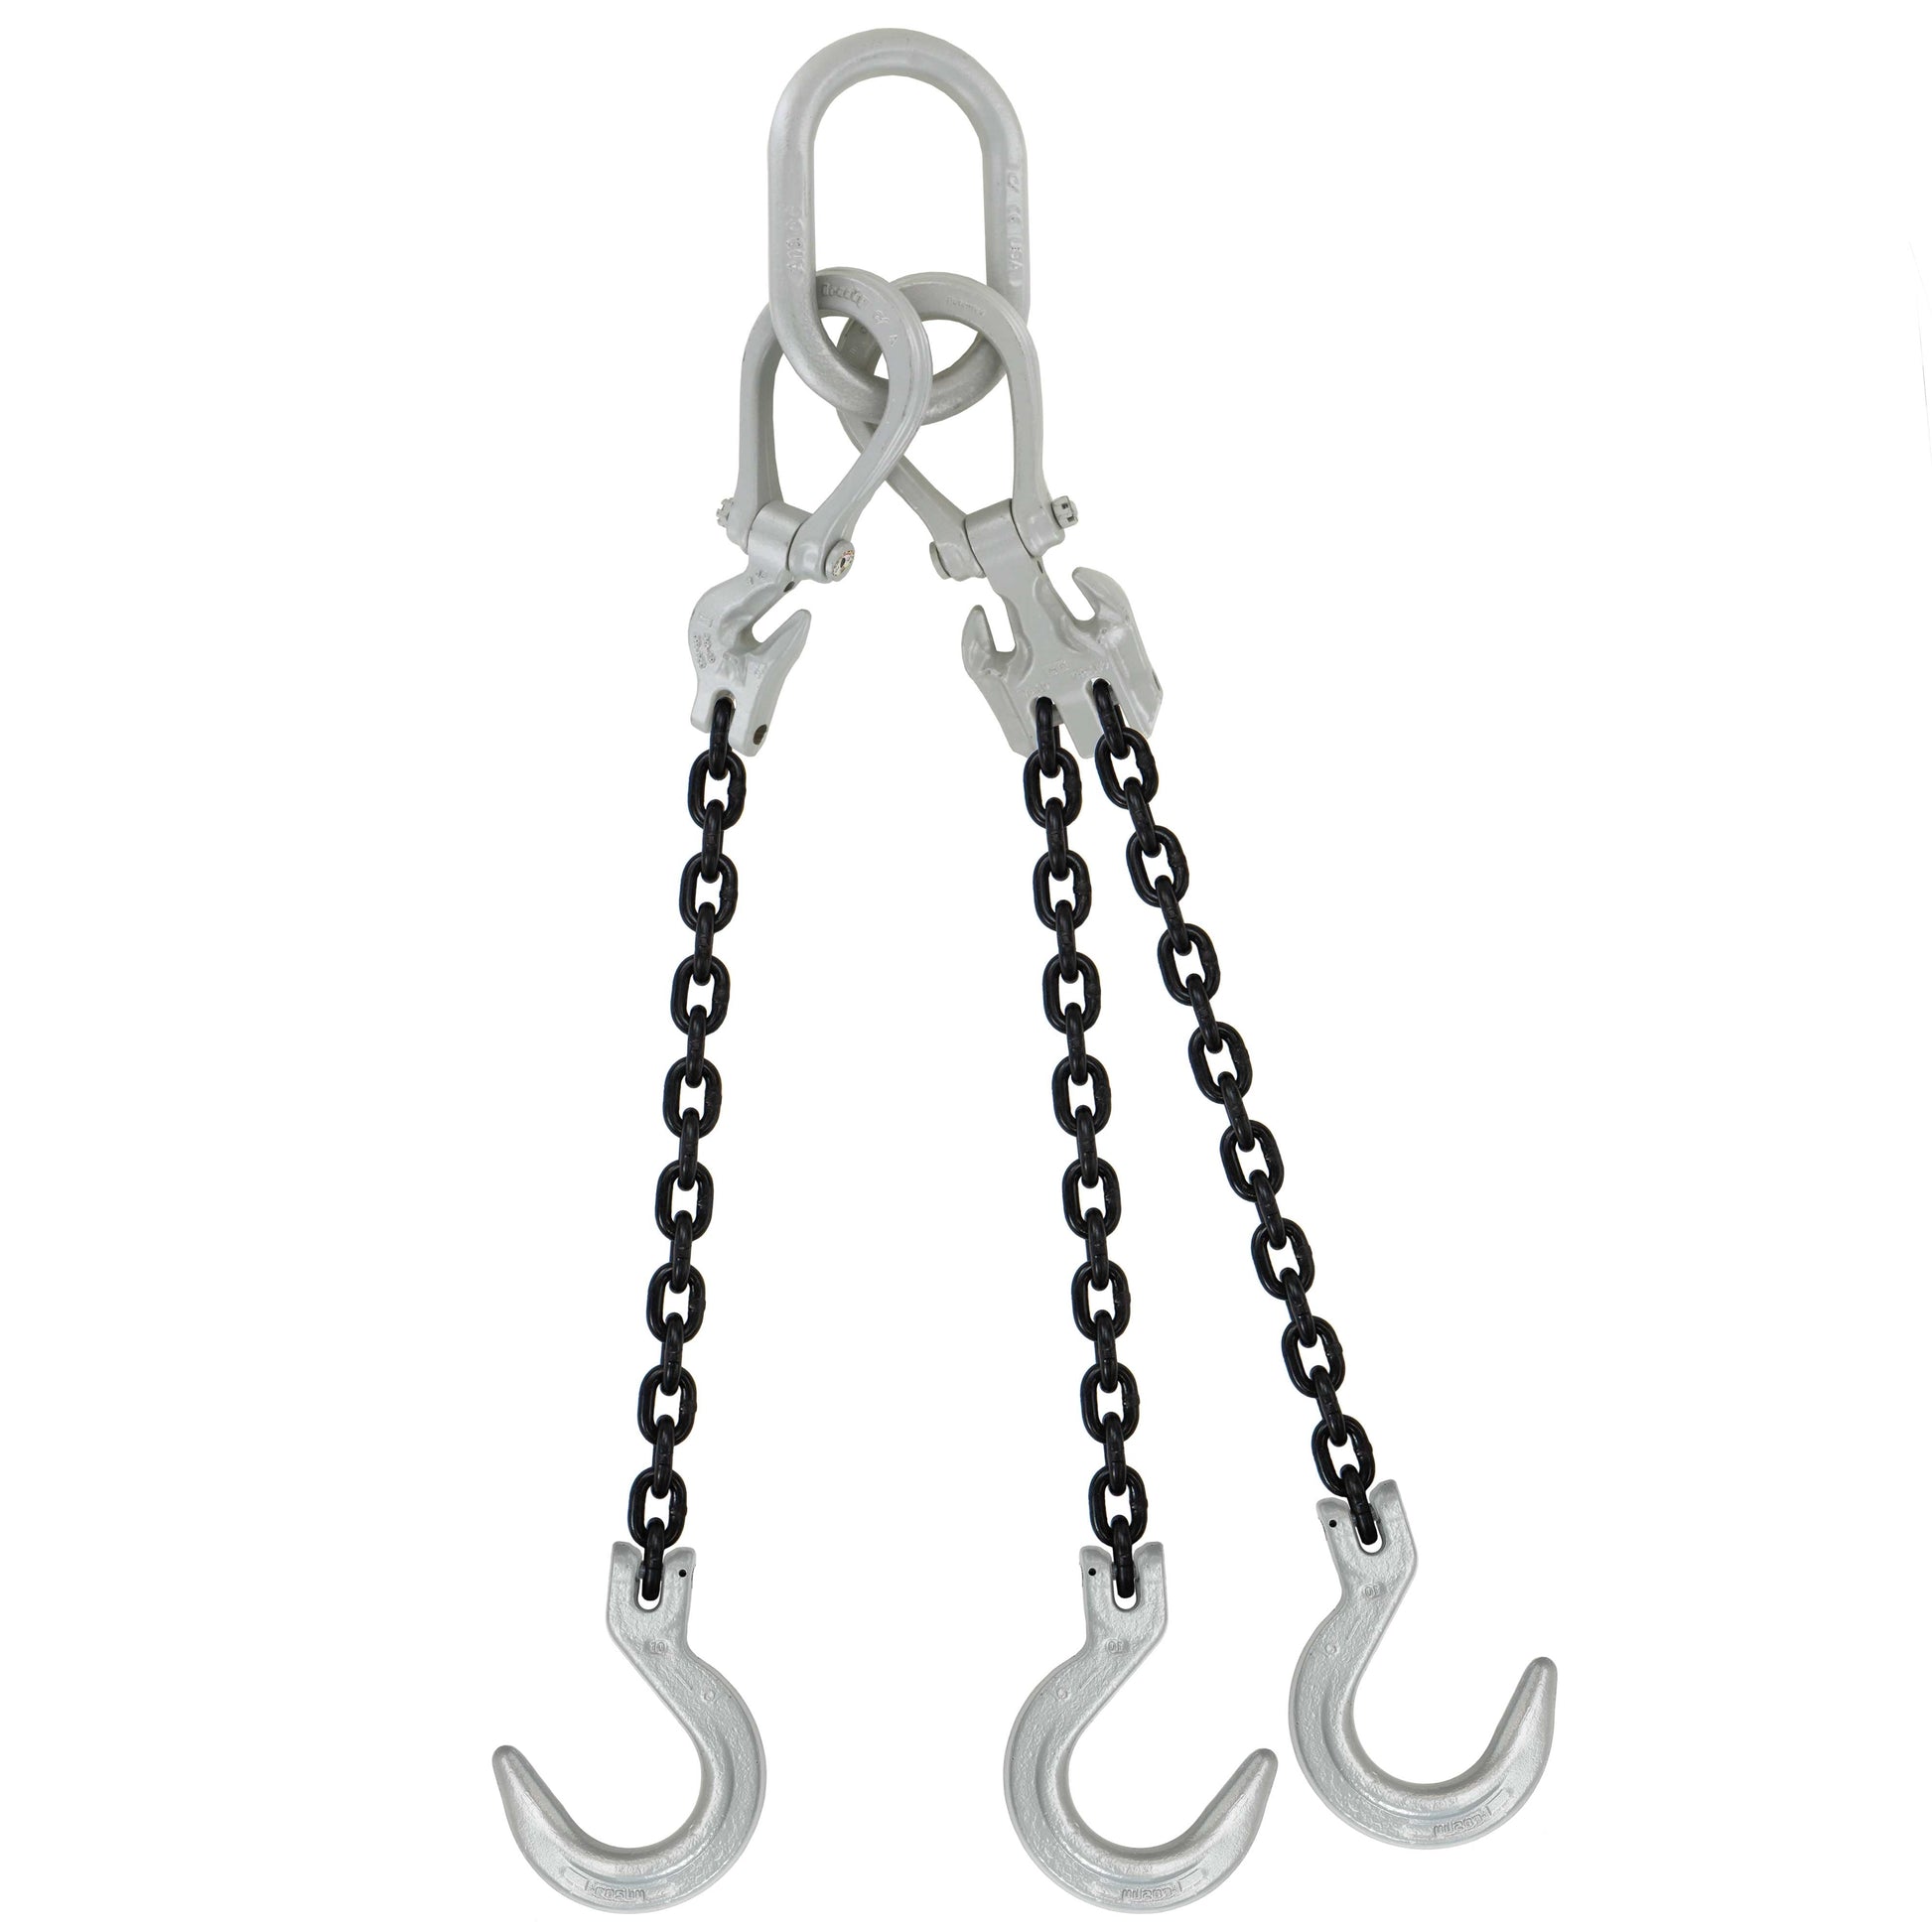 12 inch x 15 foot Domestic Adjustable 3 Leg Chain Sling w Crosby Foundry Hooks Grade 100 image 1 of 2